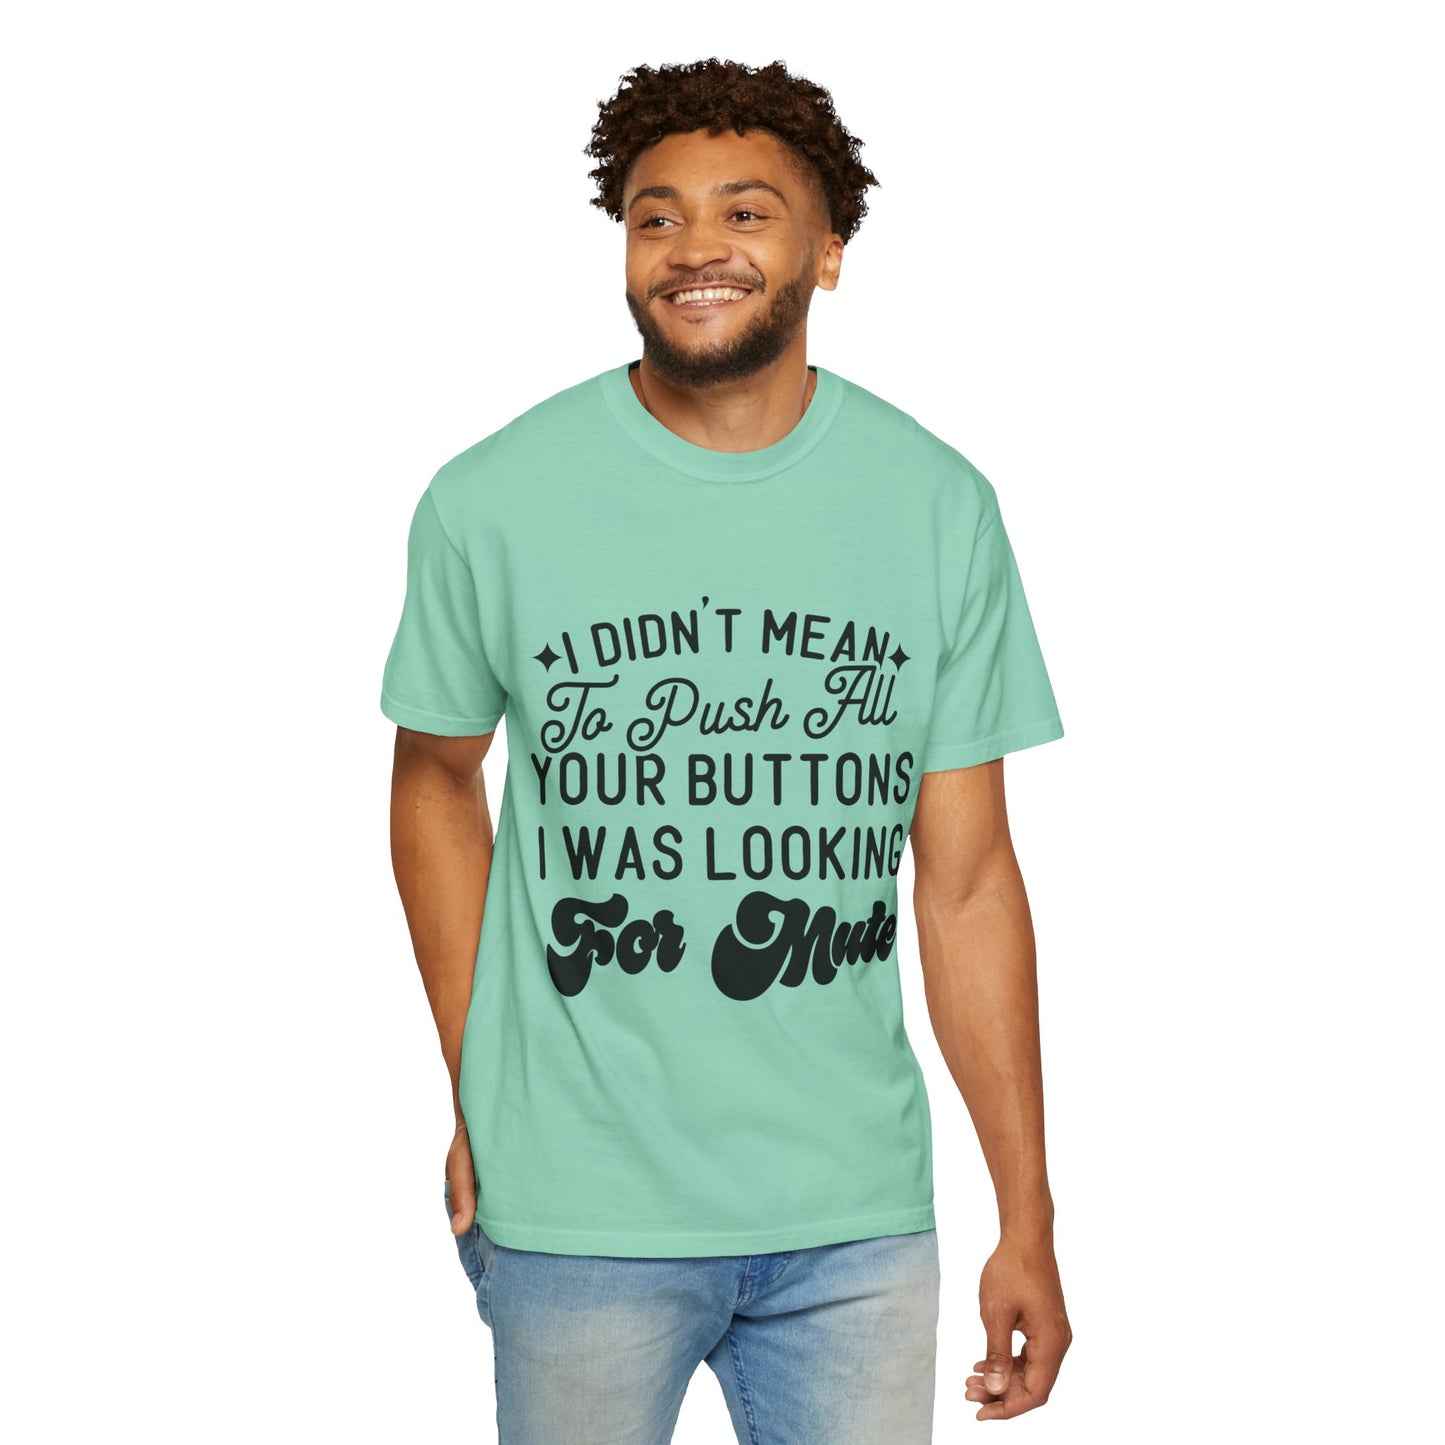 I don't mean to push all your buttons - Unisex Garment-Dyed T-shirt